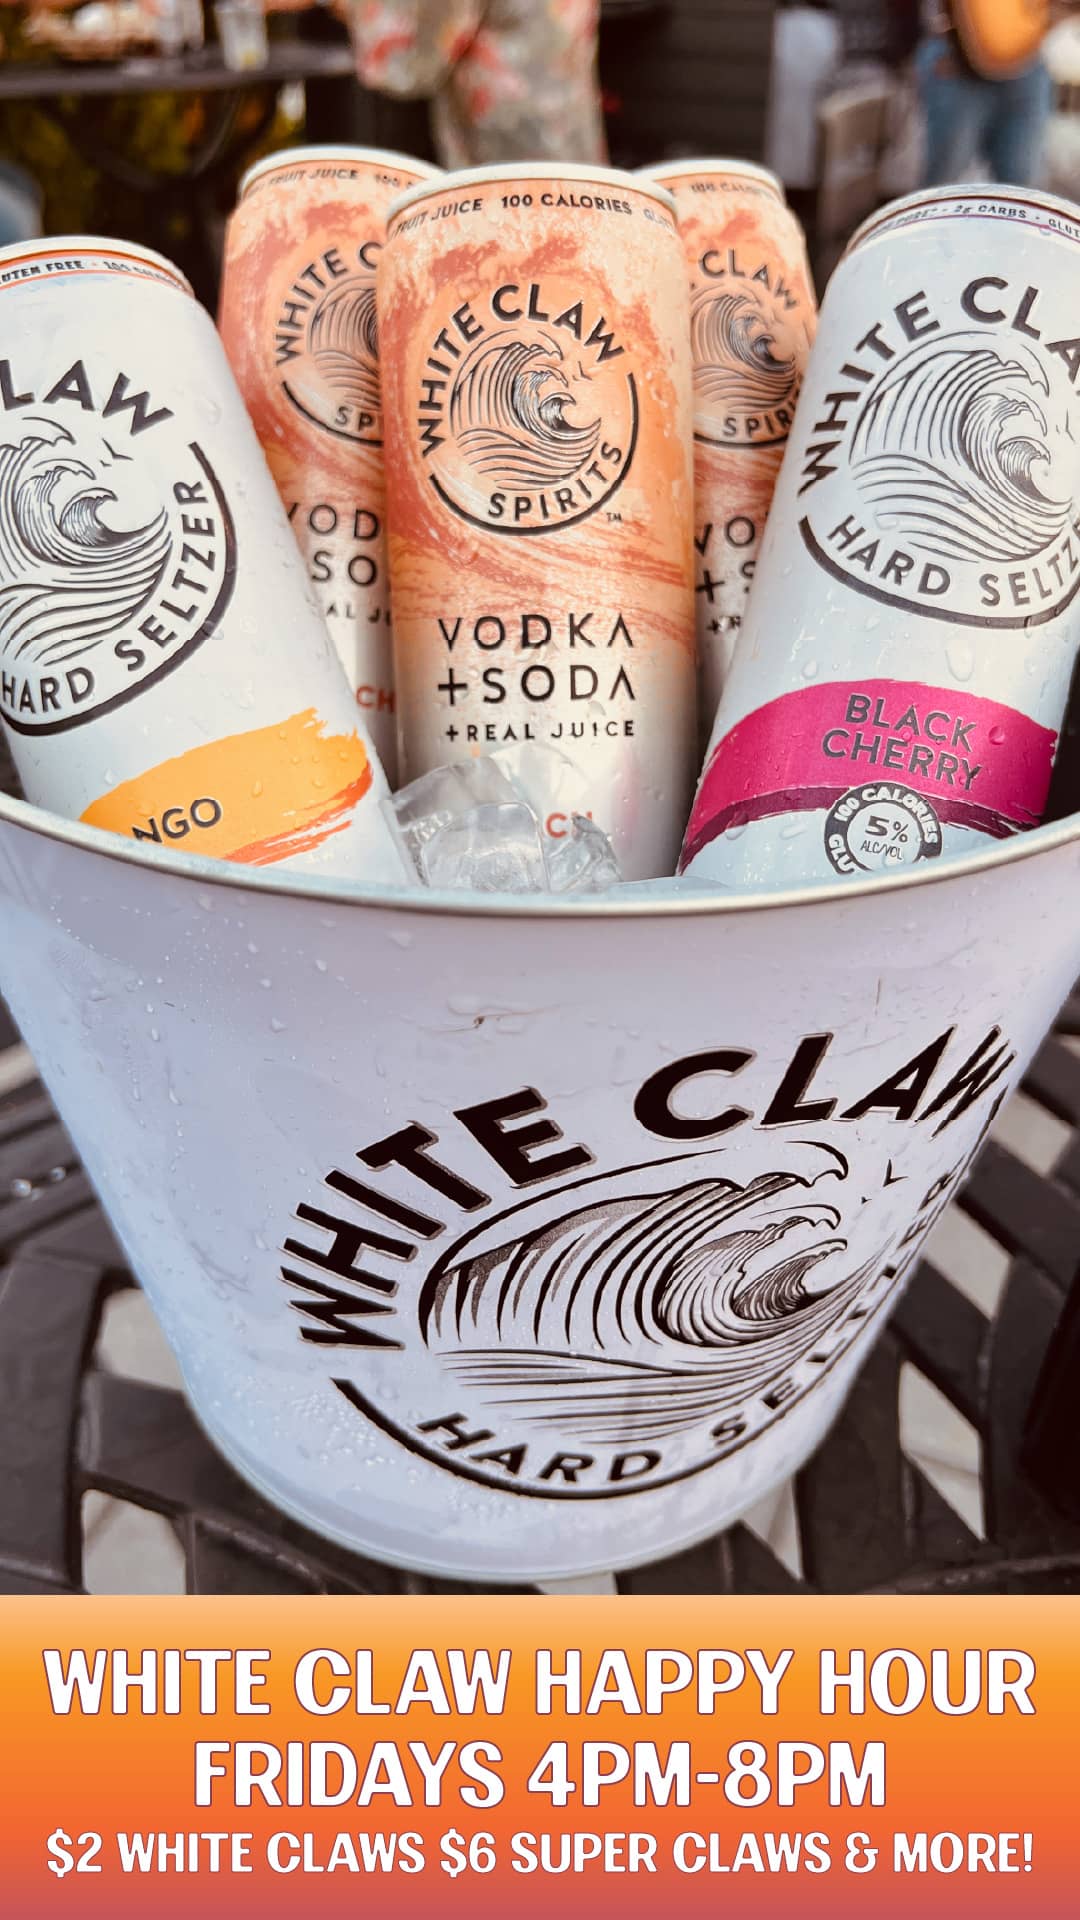 Poster for White Claw Specials at Joe's on Weed St.